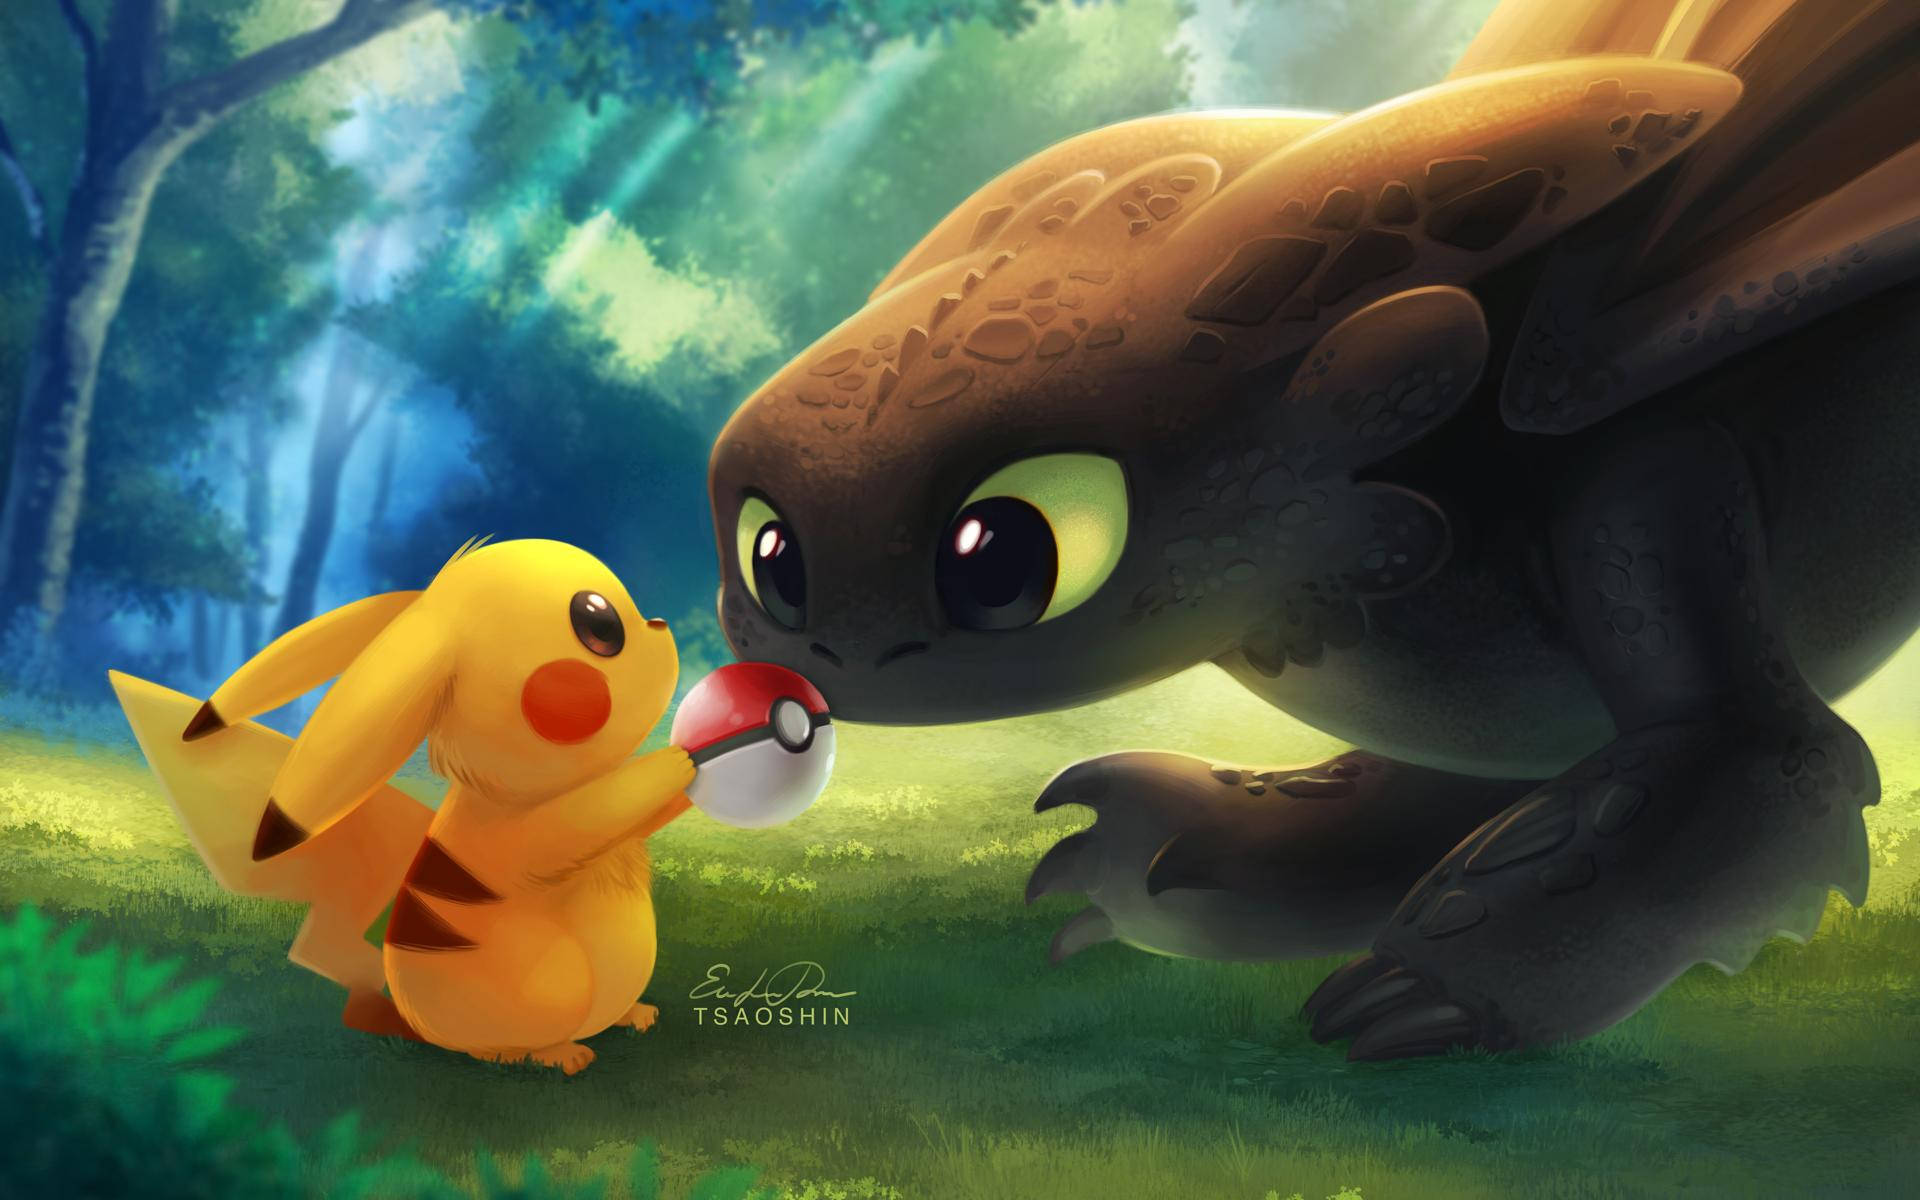 Showing support for two real life legends – Pikachu and Toothless. Wallpaper